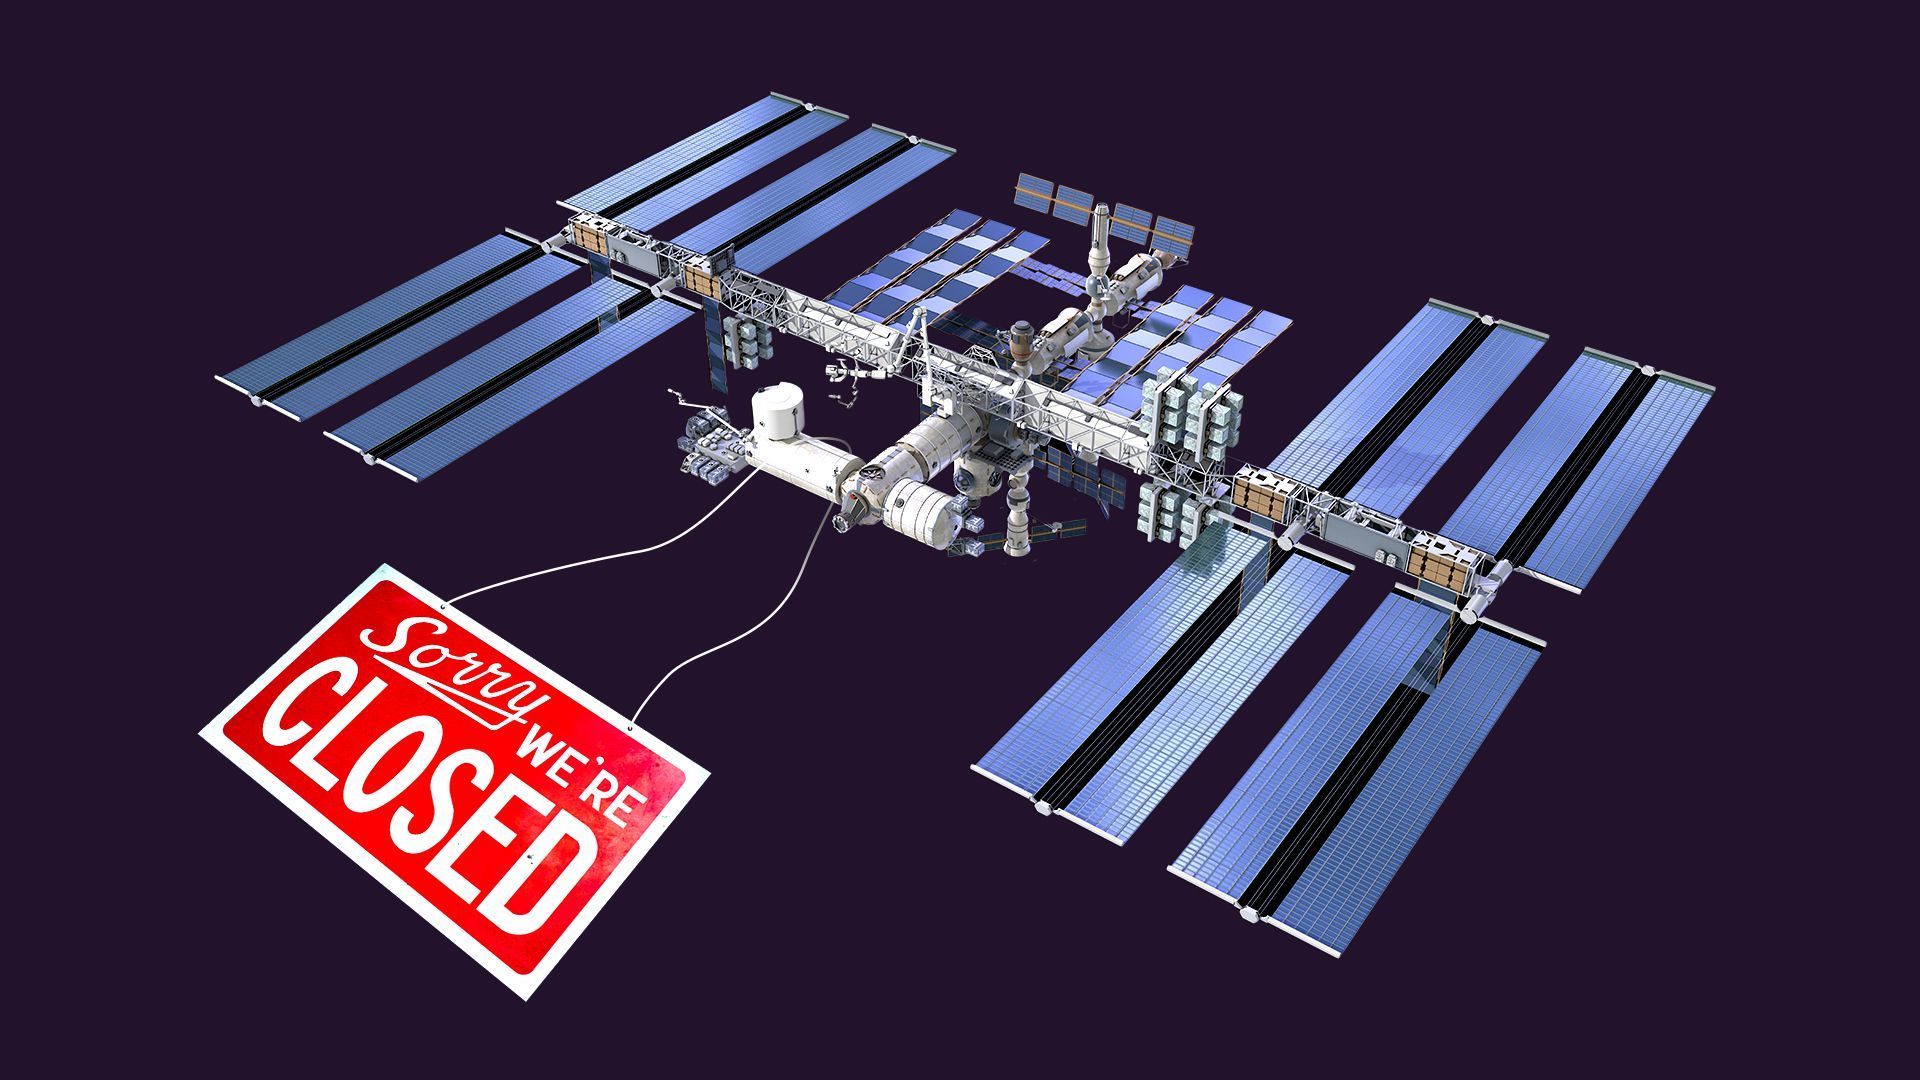 Illustration of the International Space Station with a closed sign attached